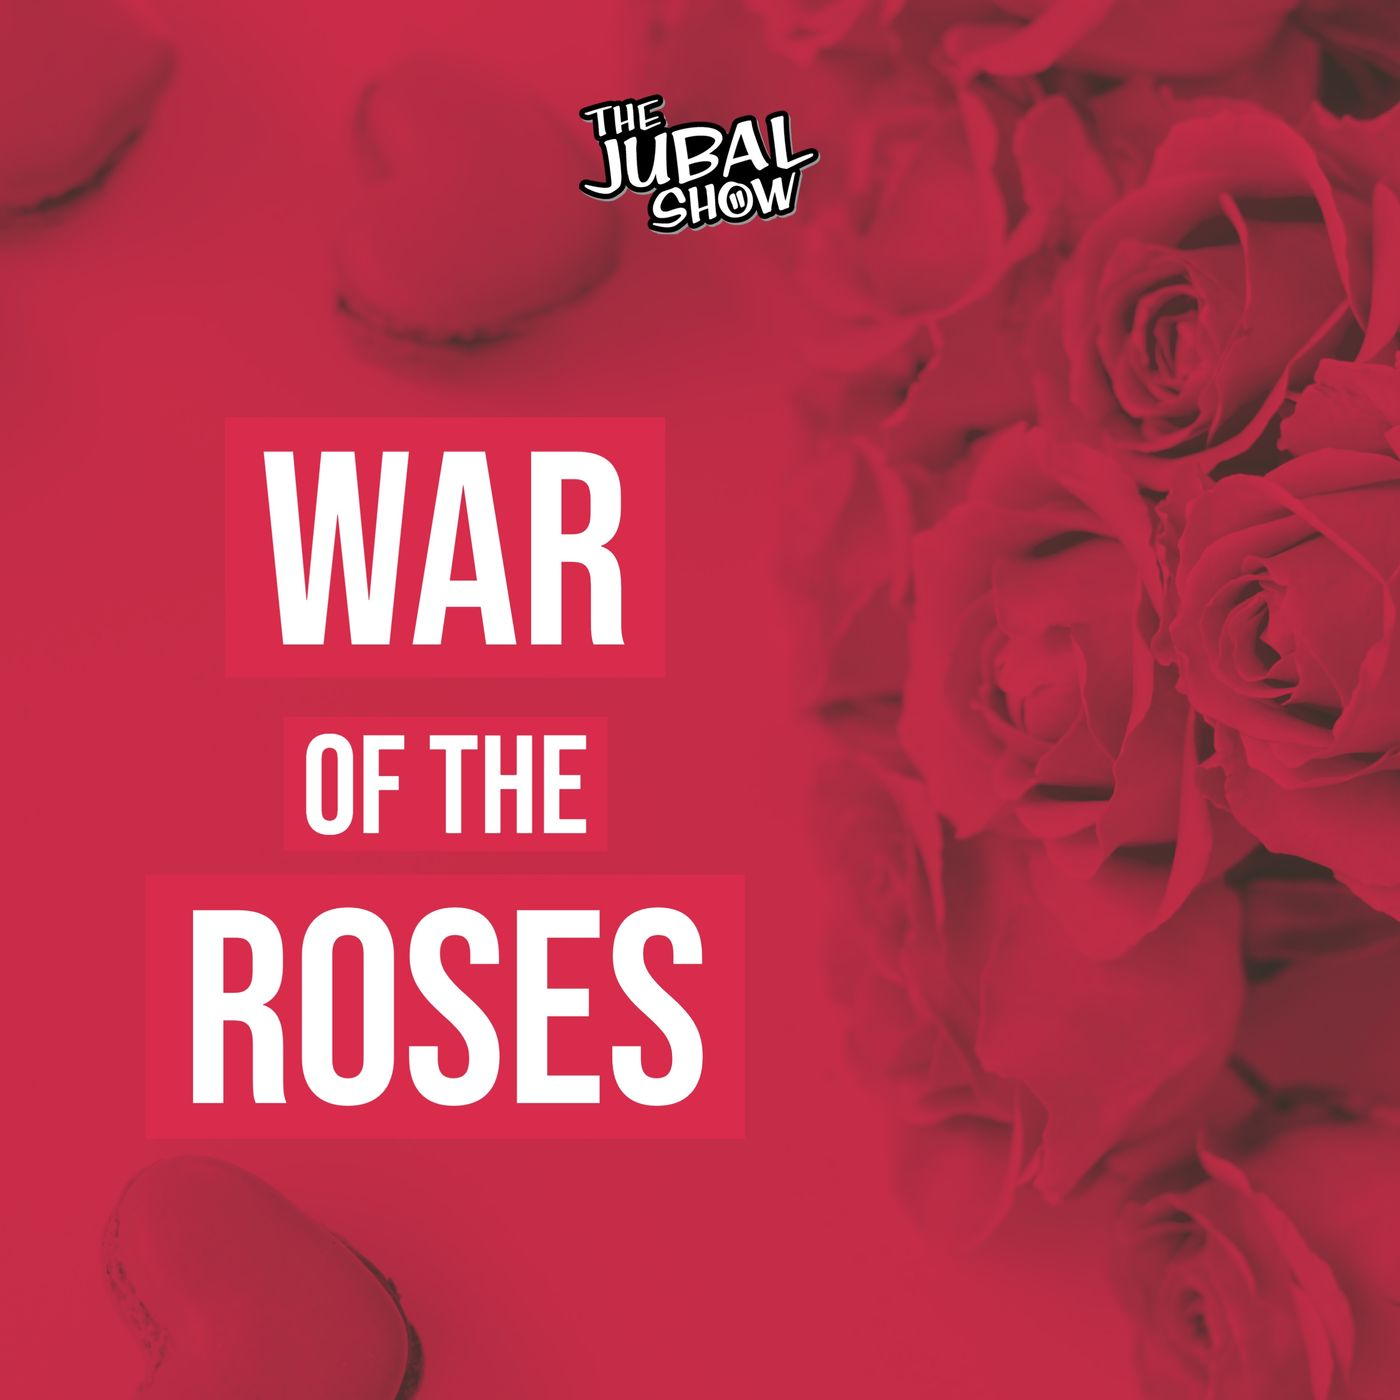 This War of the Roses is so unexpected that Jubal Fresh almost messed it up!